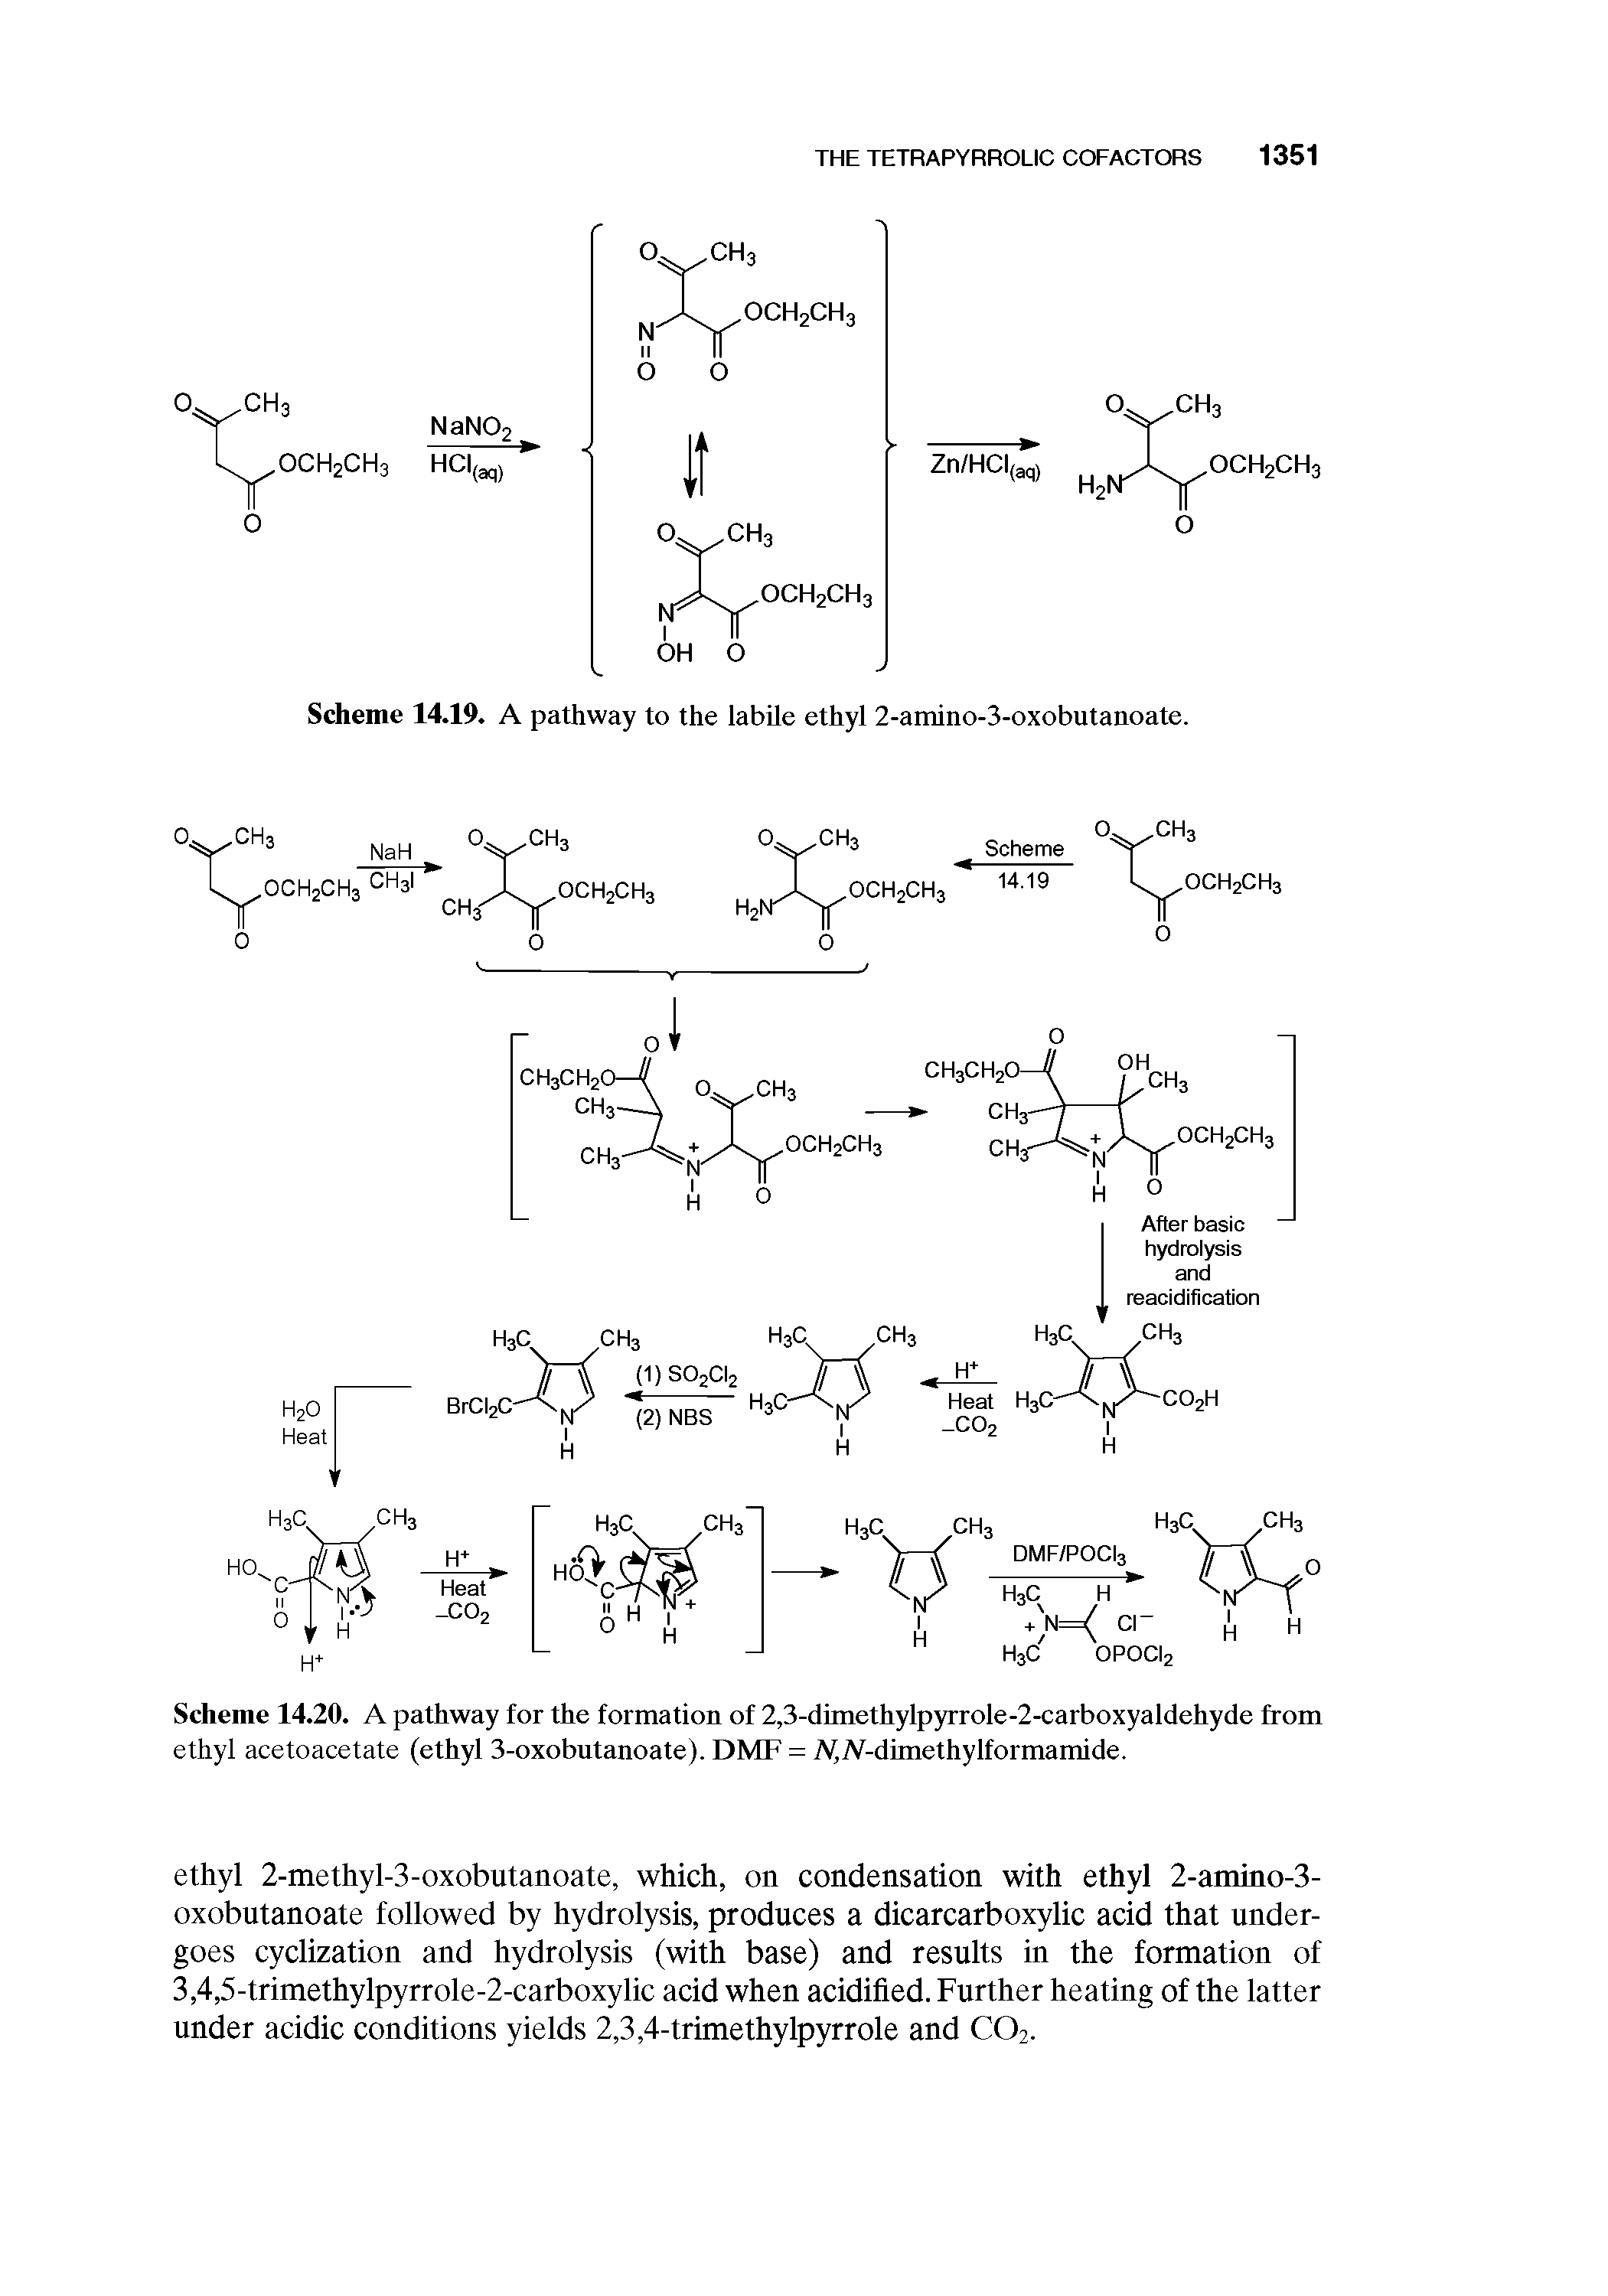 Scheme 14.20. A pathway for the formation of 2,3-dunethylpyrrole-2-carboxyaldehyde from ethyl acetoacetate (ethyl 3-oxobutanoate). DMF = A,A-dimethylformamide.